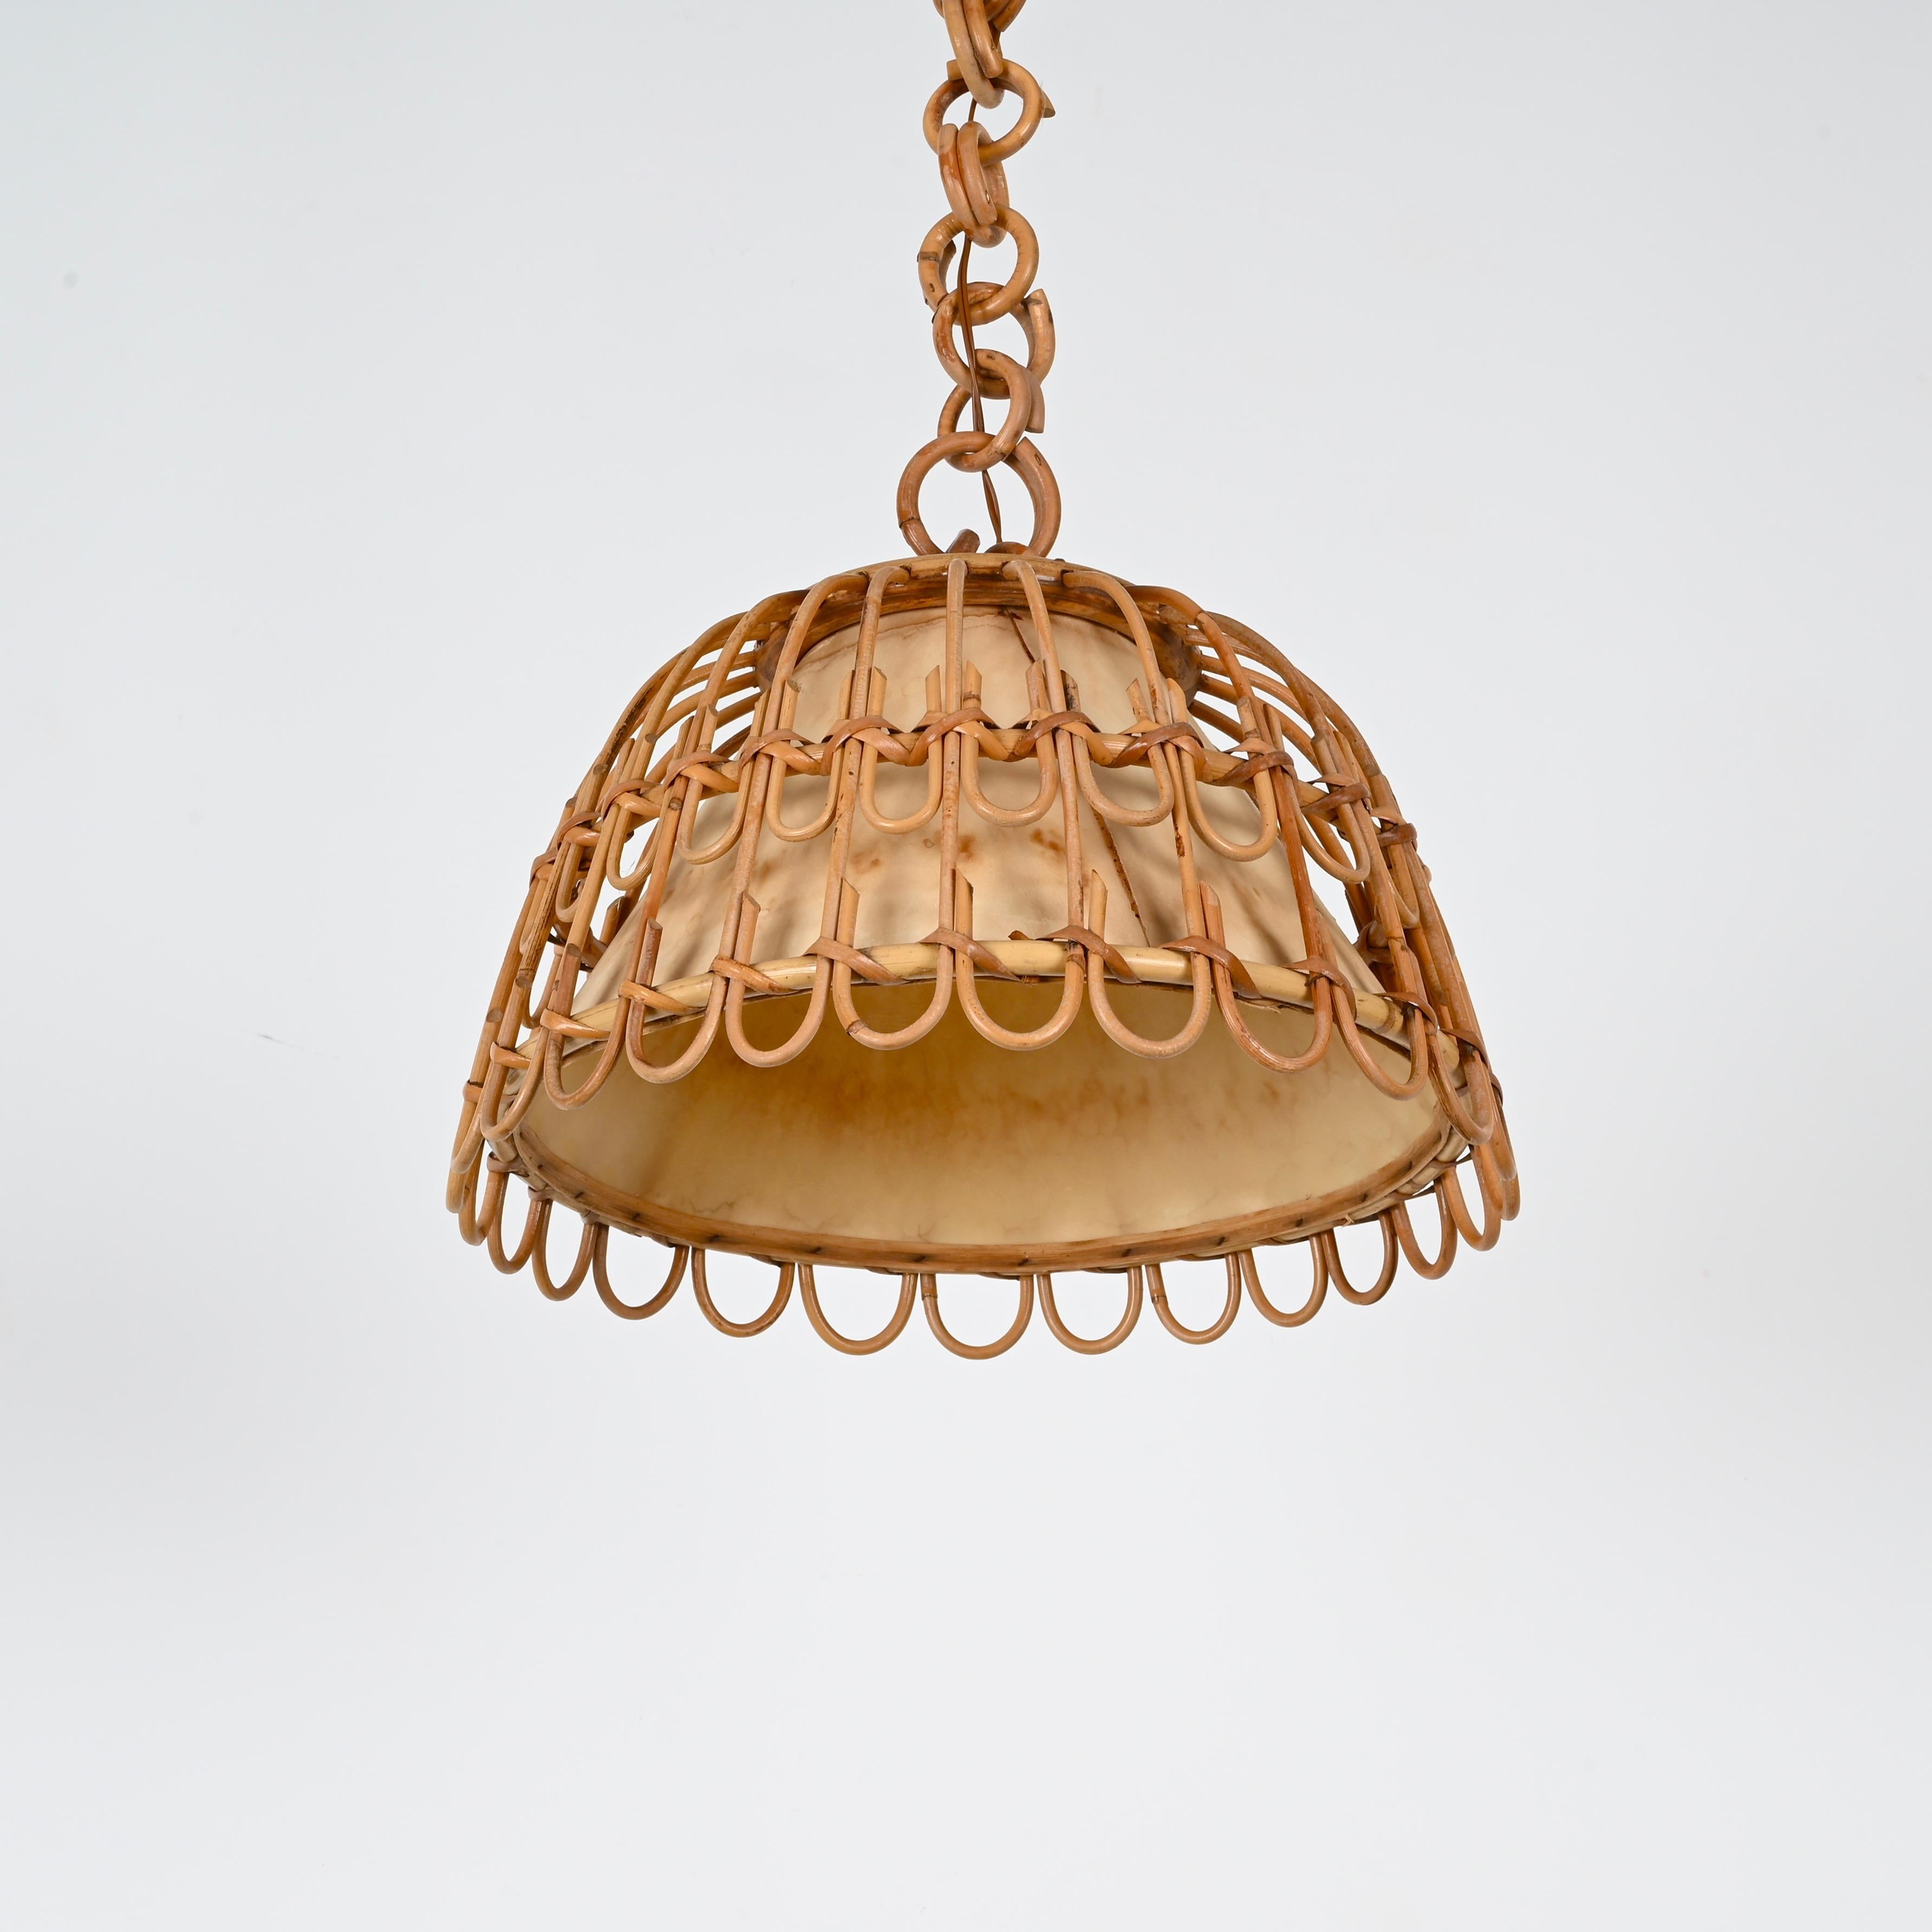 Midcentury French Riviera Bambo, Rattan amd Wicker Italian Chandelier, 1960s In Good Condition For Sale In Roma, IT